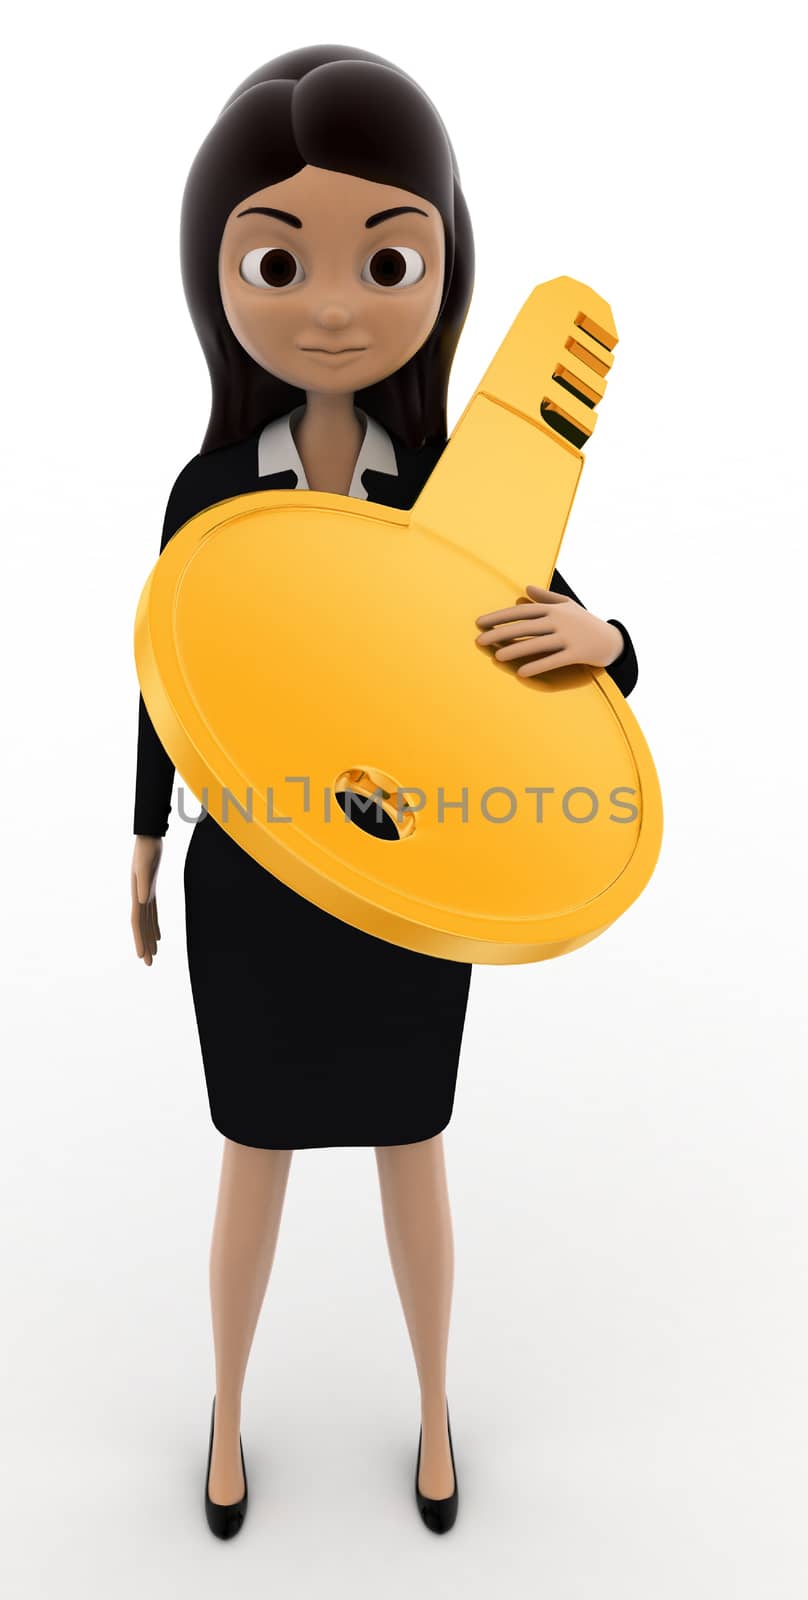 3d woman carry big golden key on shoulder concept on white bakcground, front angle view